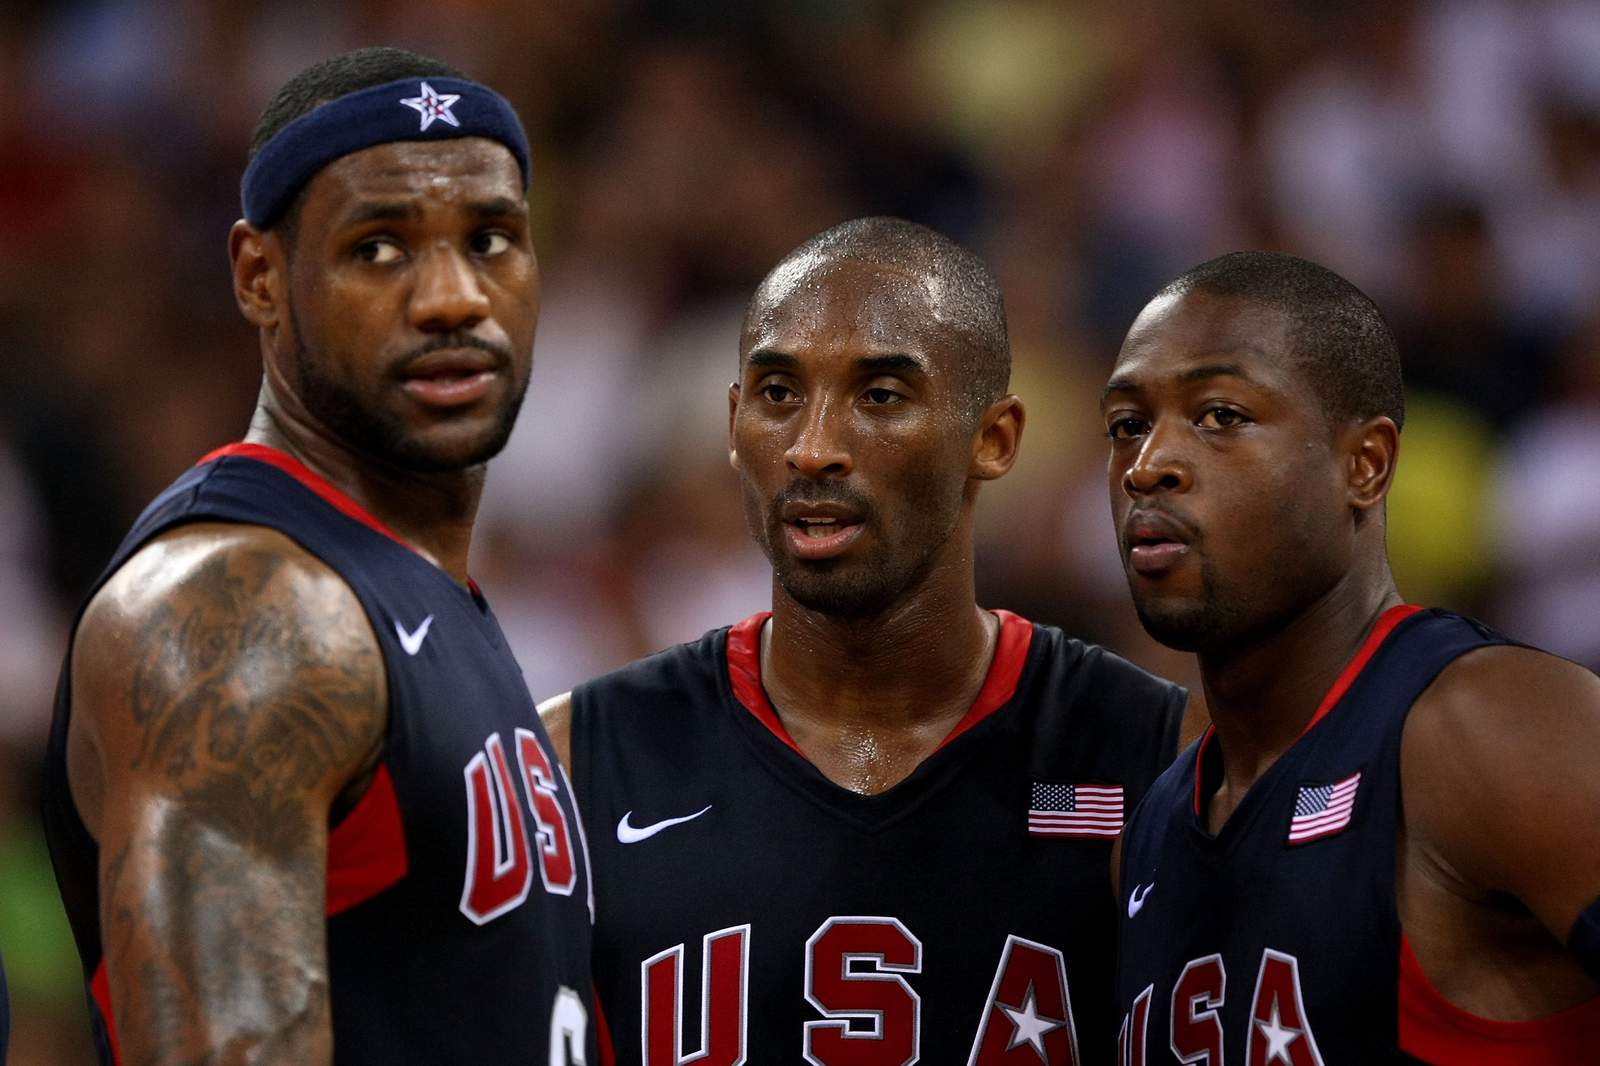 From left, LeBron James, Kobe Bryant and Dwyane Wade compete against Argentina during a men's semifinal game at the Wukesong Indoor Stadium on Day 14 of the Beijing 2008 Olympic Games.